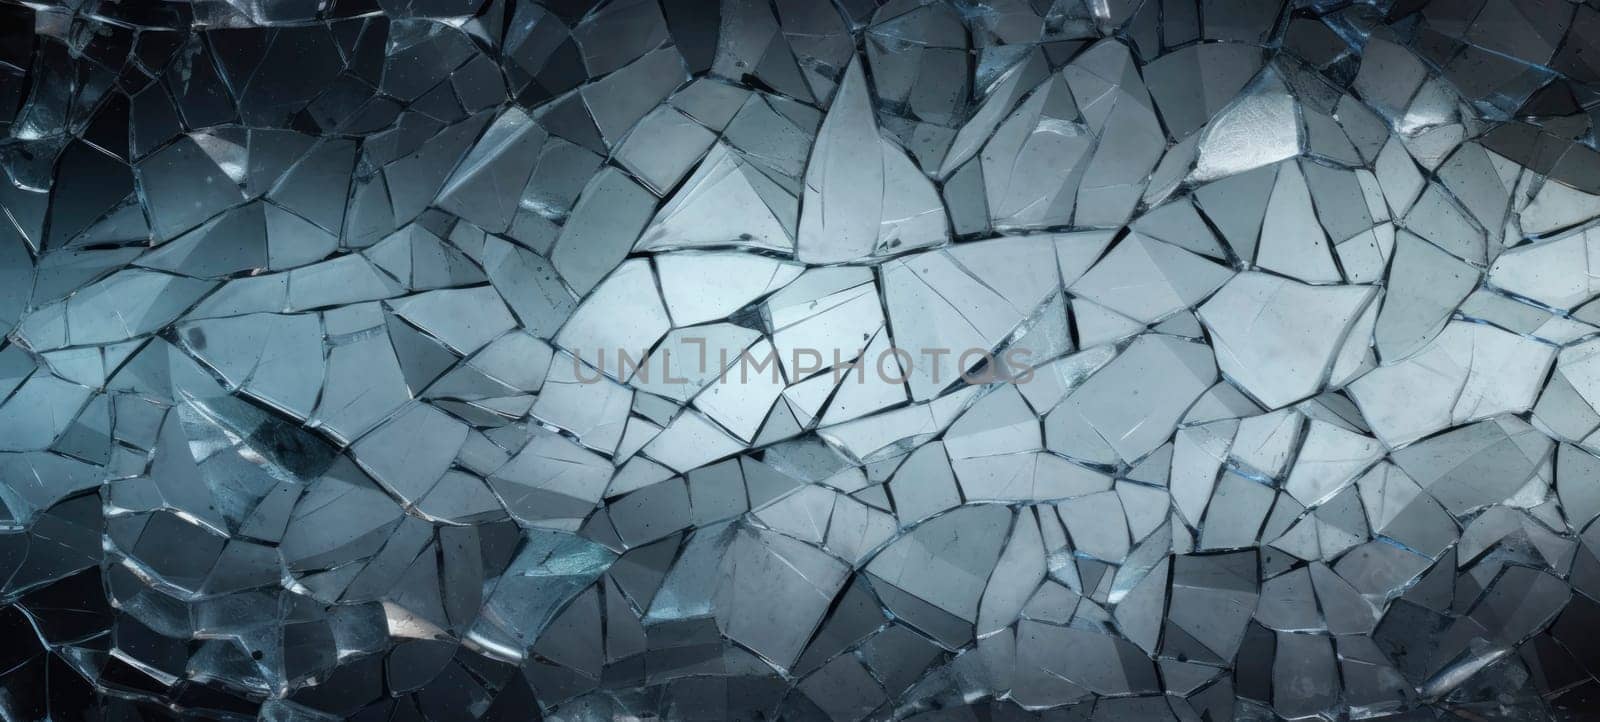 Abstract Cracked Glass Texture Close-Up by andreyz